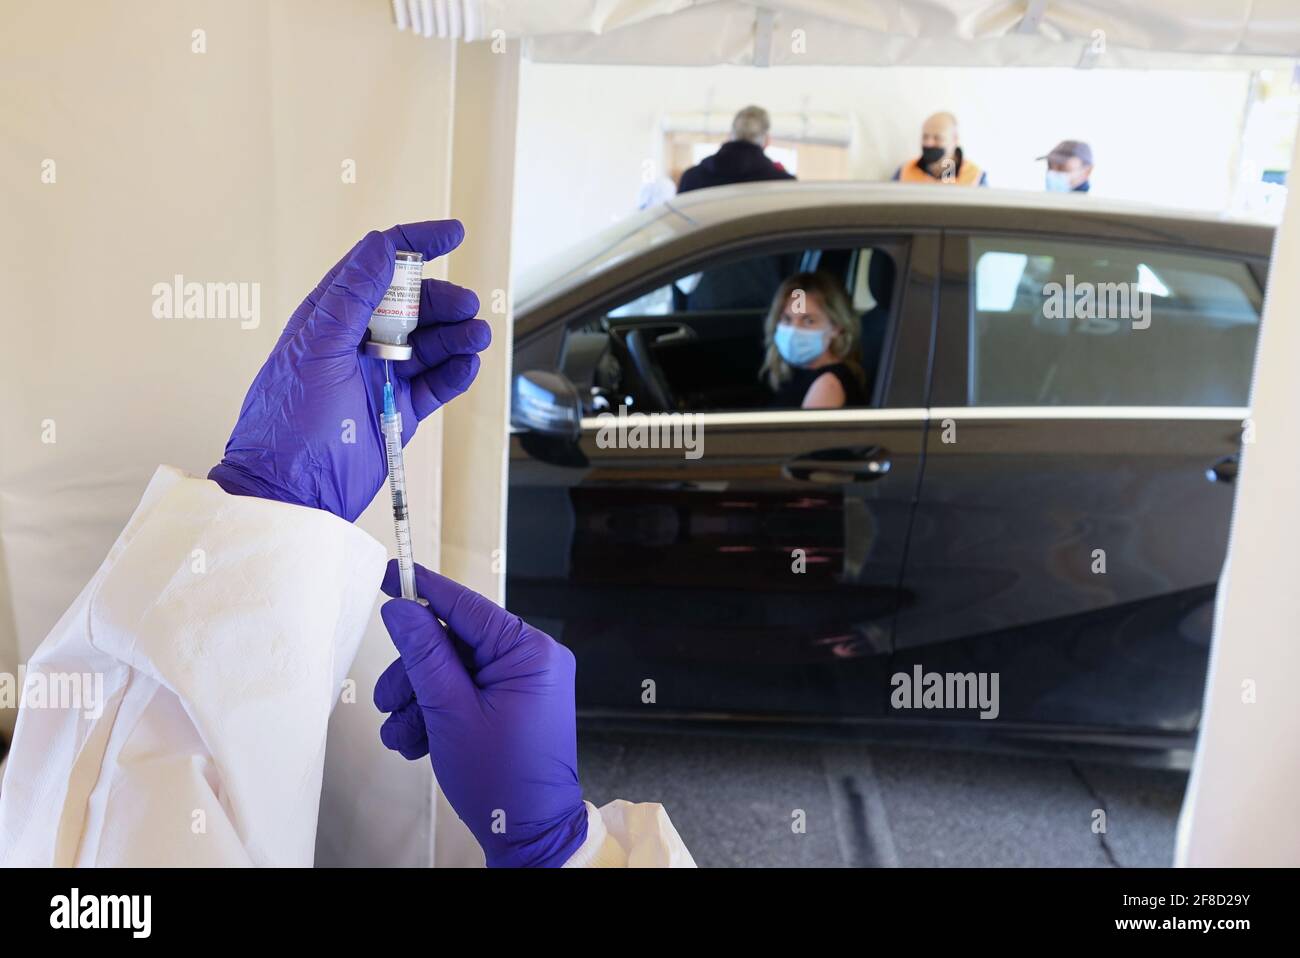 Mass vaccination campaign, inoculation of vaccine in the car at a drive-through vaccine site. Turin, Italy - April 2021 Stock Photo